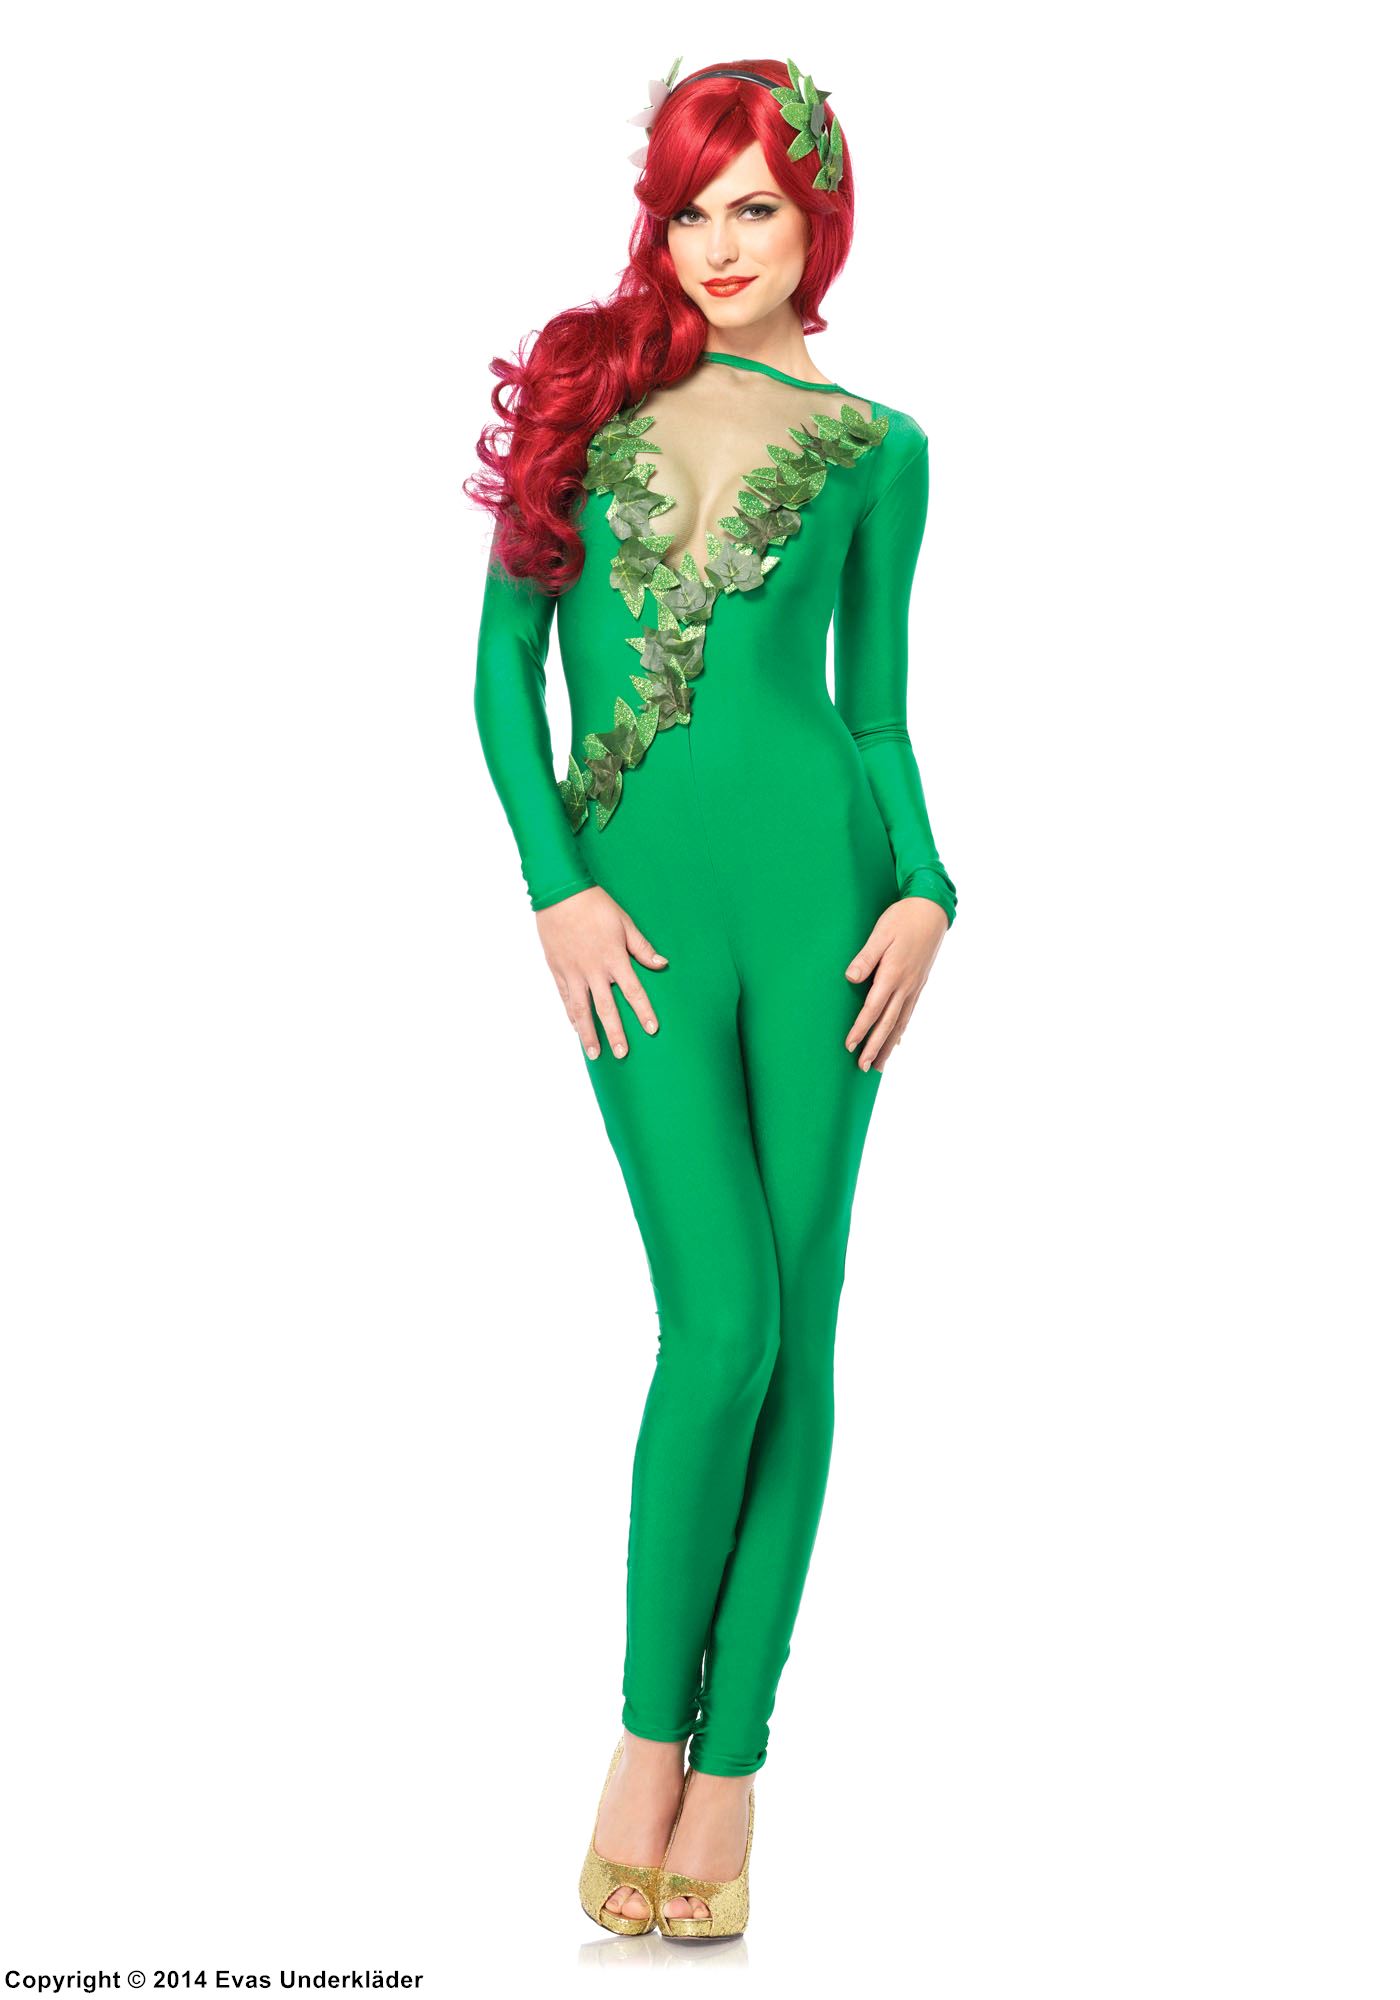 Poison Ivy, costume catsuit, mesh inlay, leaves